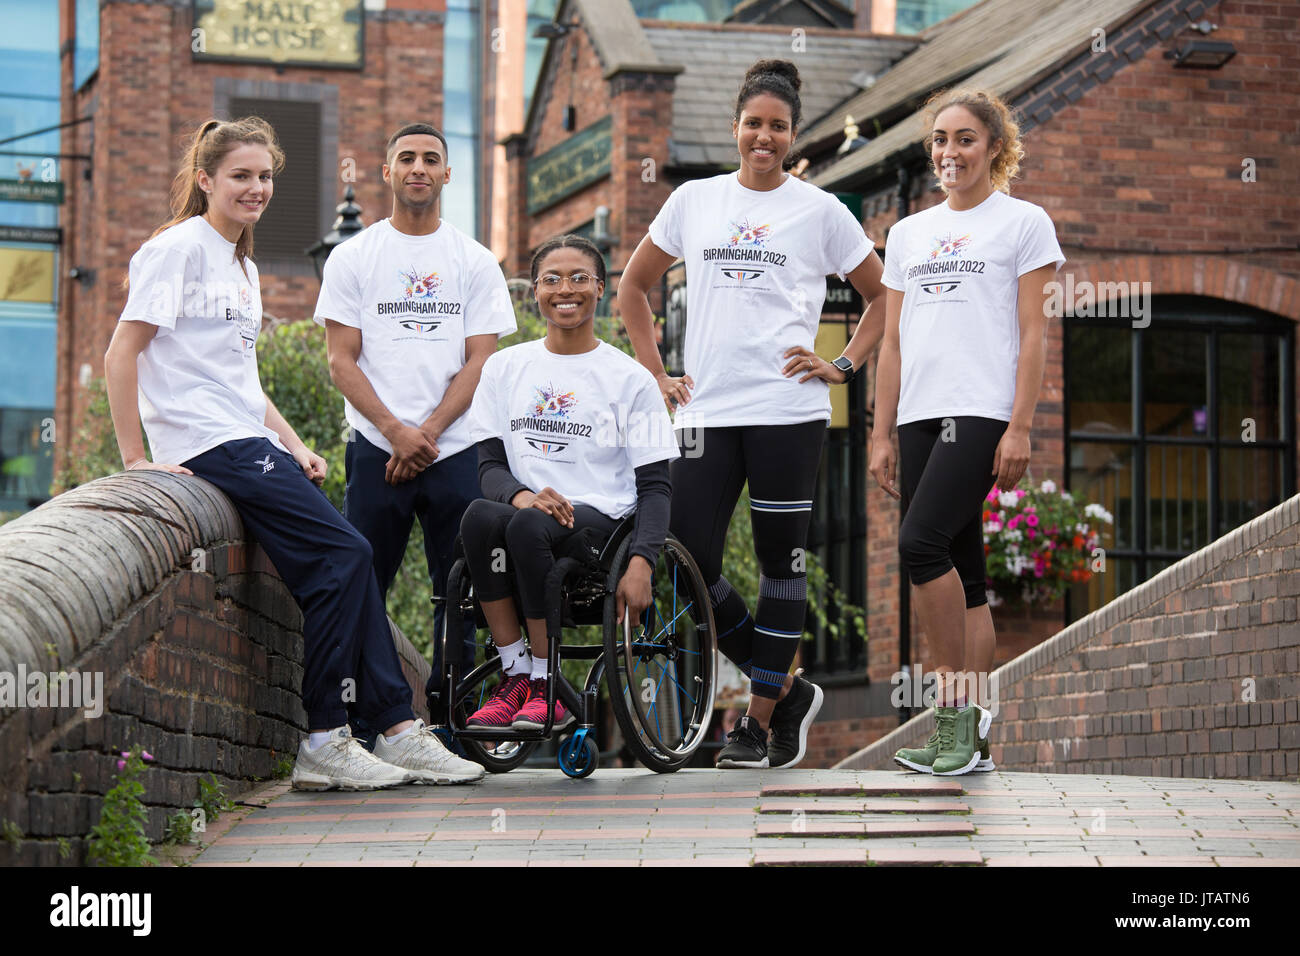 Five athletes supporting the Birmingham 2022 Commonwealth Games Bid Stock Photo